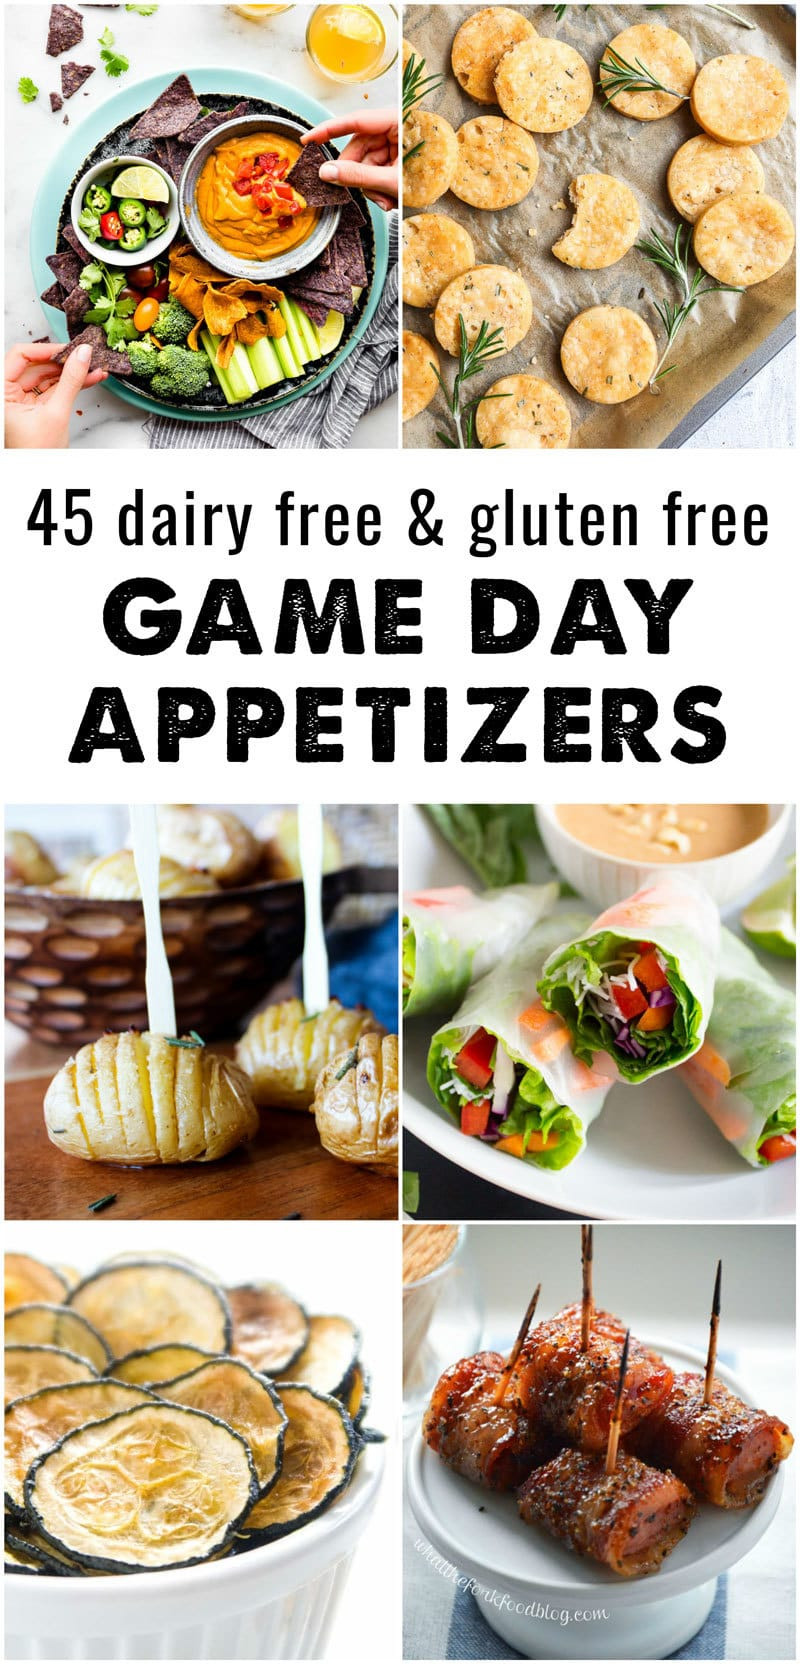 Gluten Free Appetizers
 45 Dairy Free and Gluten Free Appetizers • The Fit Cookie